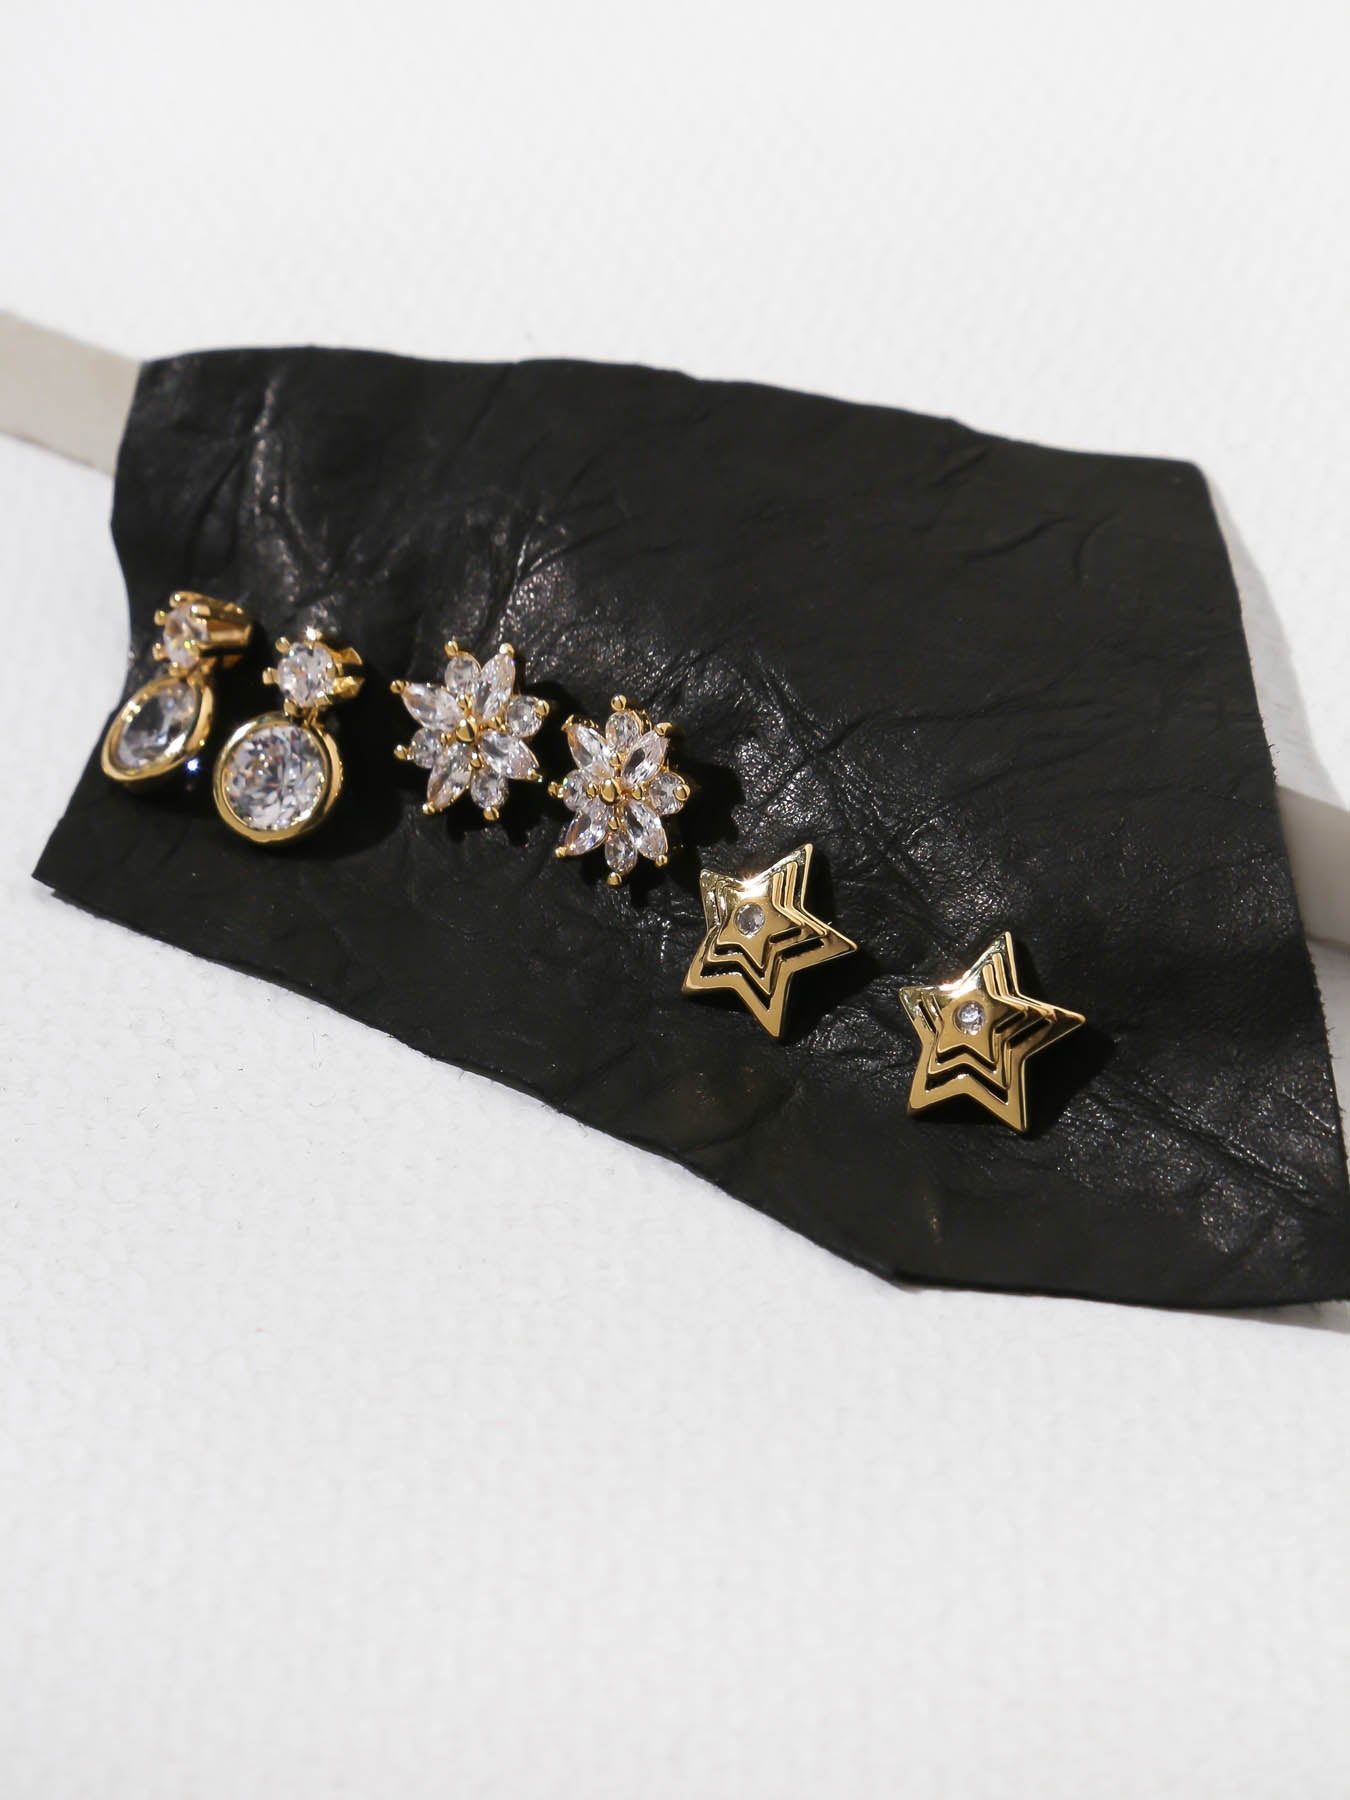 The Sultry Stars Earring Set